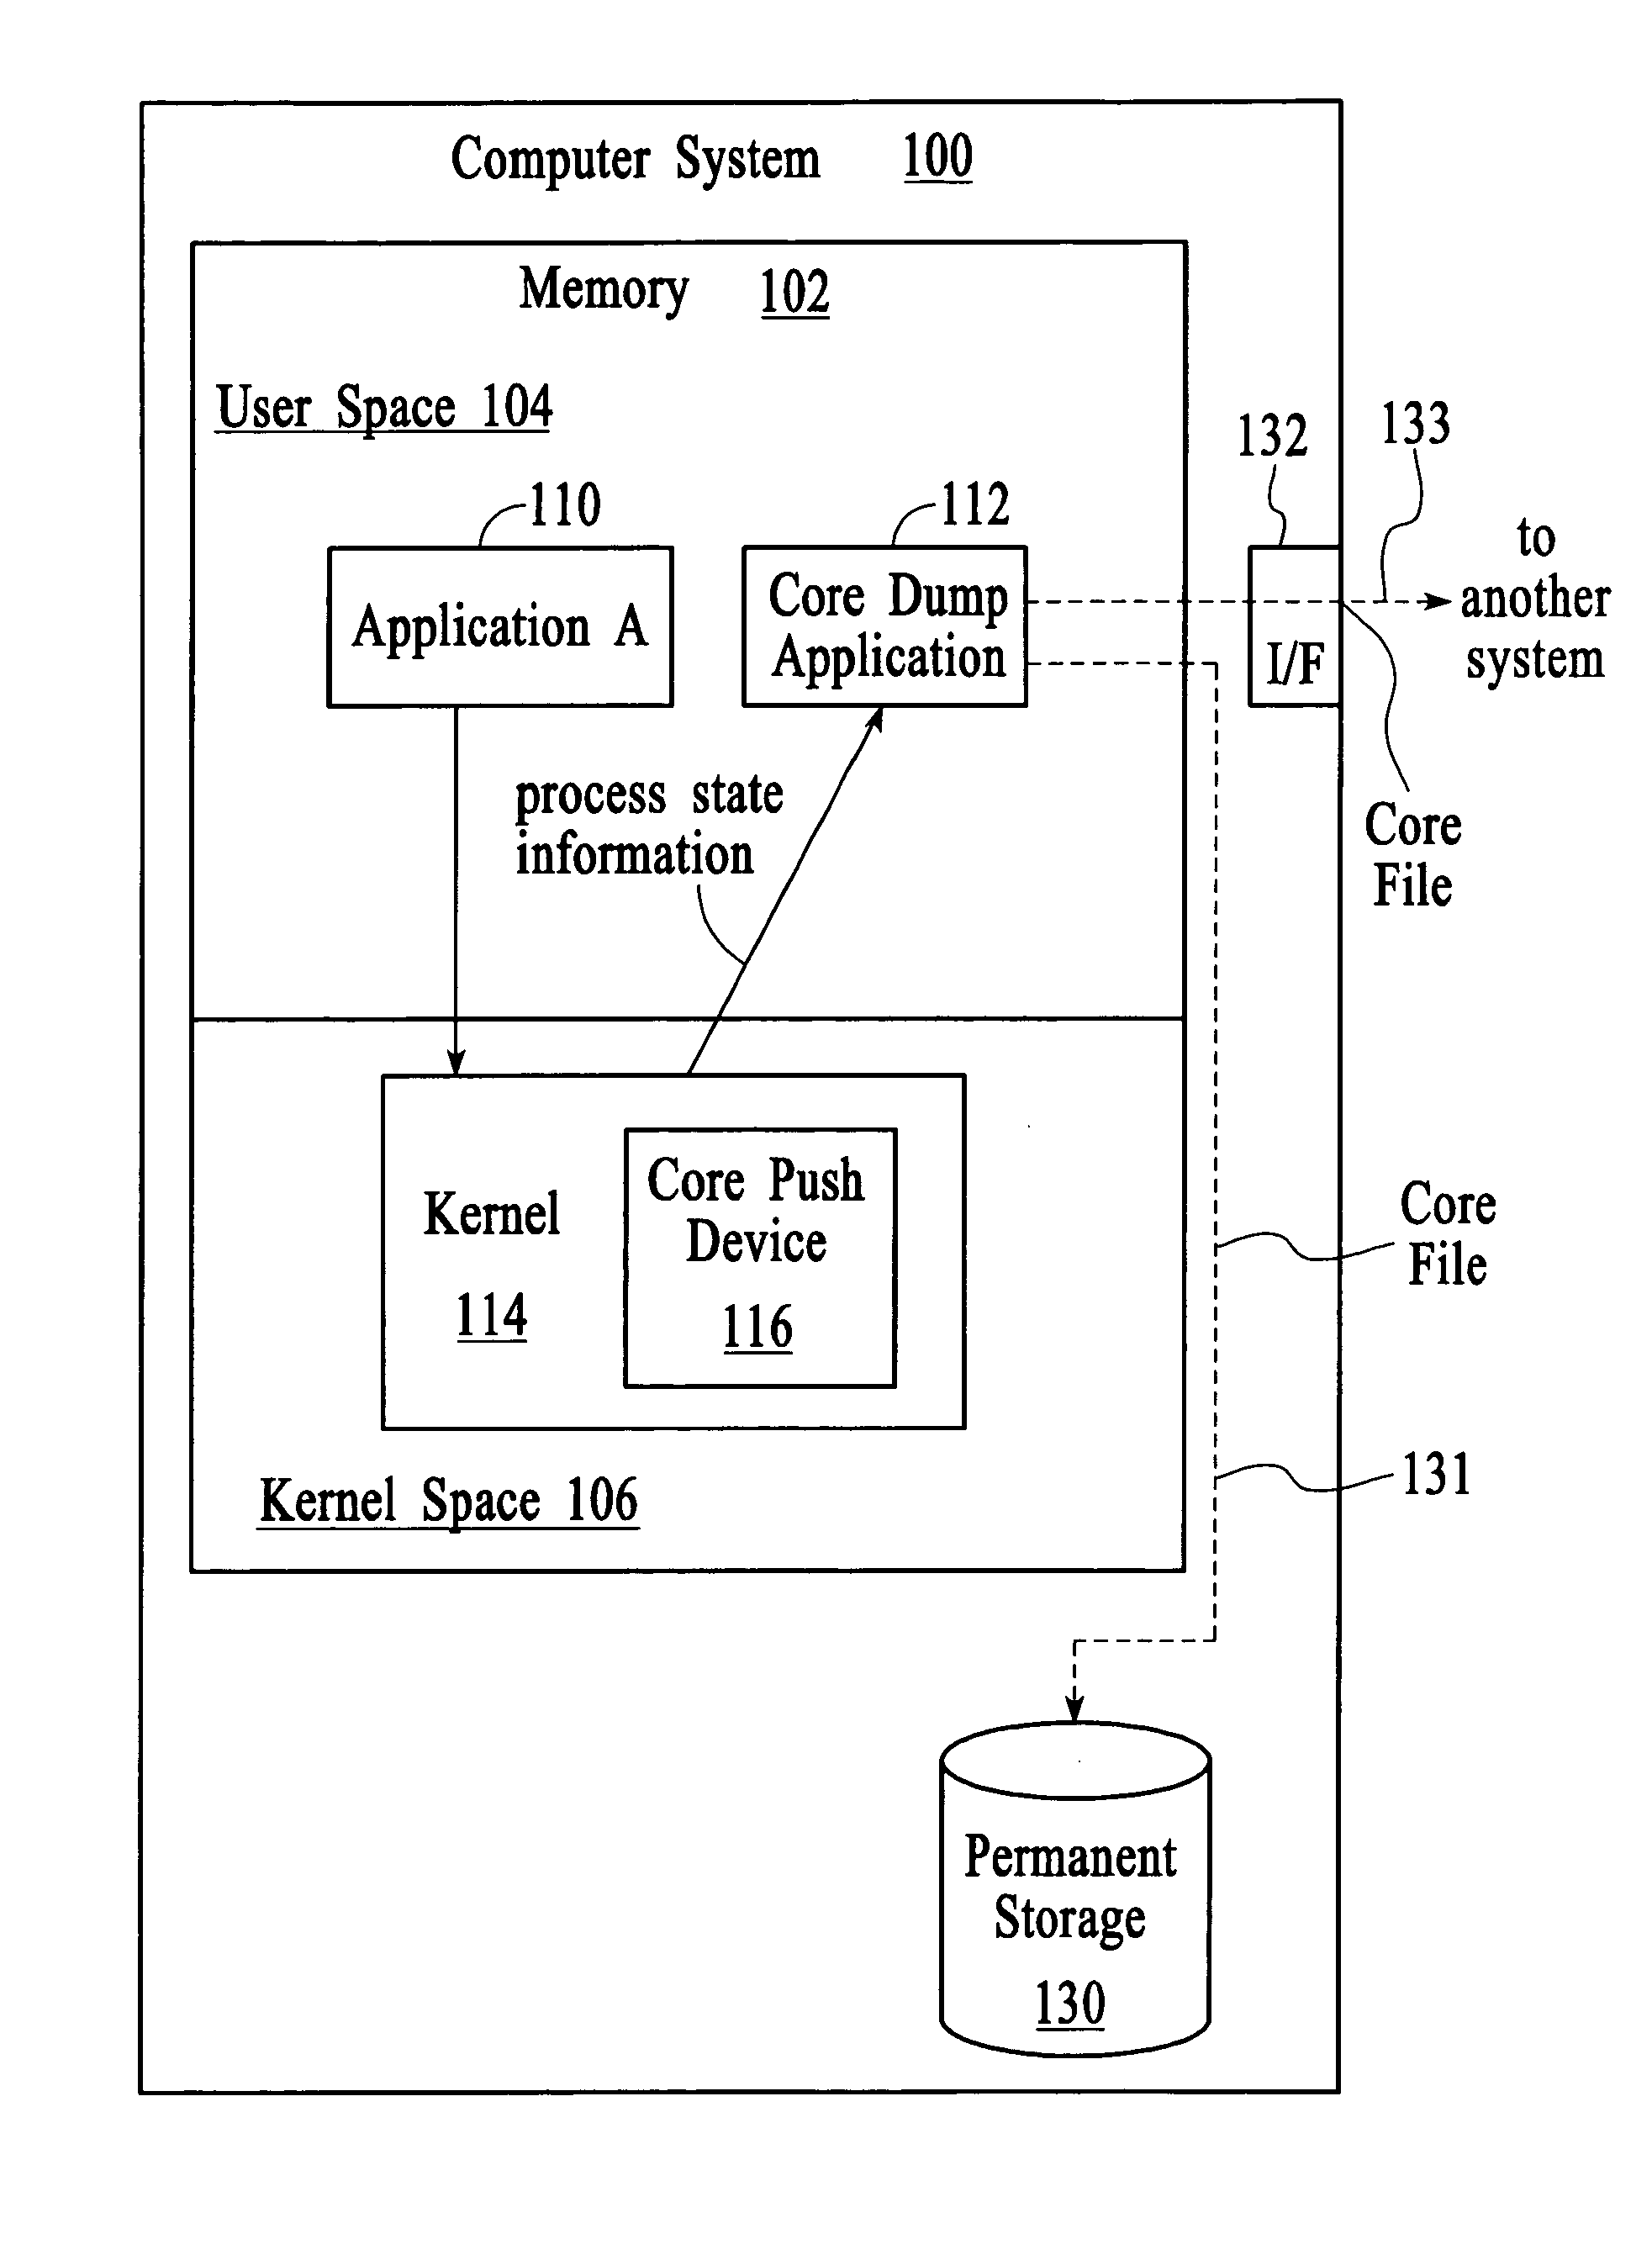 Managing process state information in an operating system environment